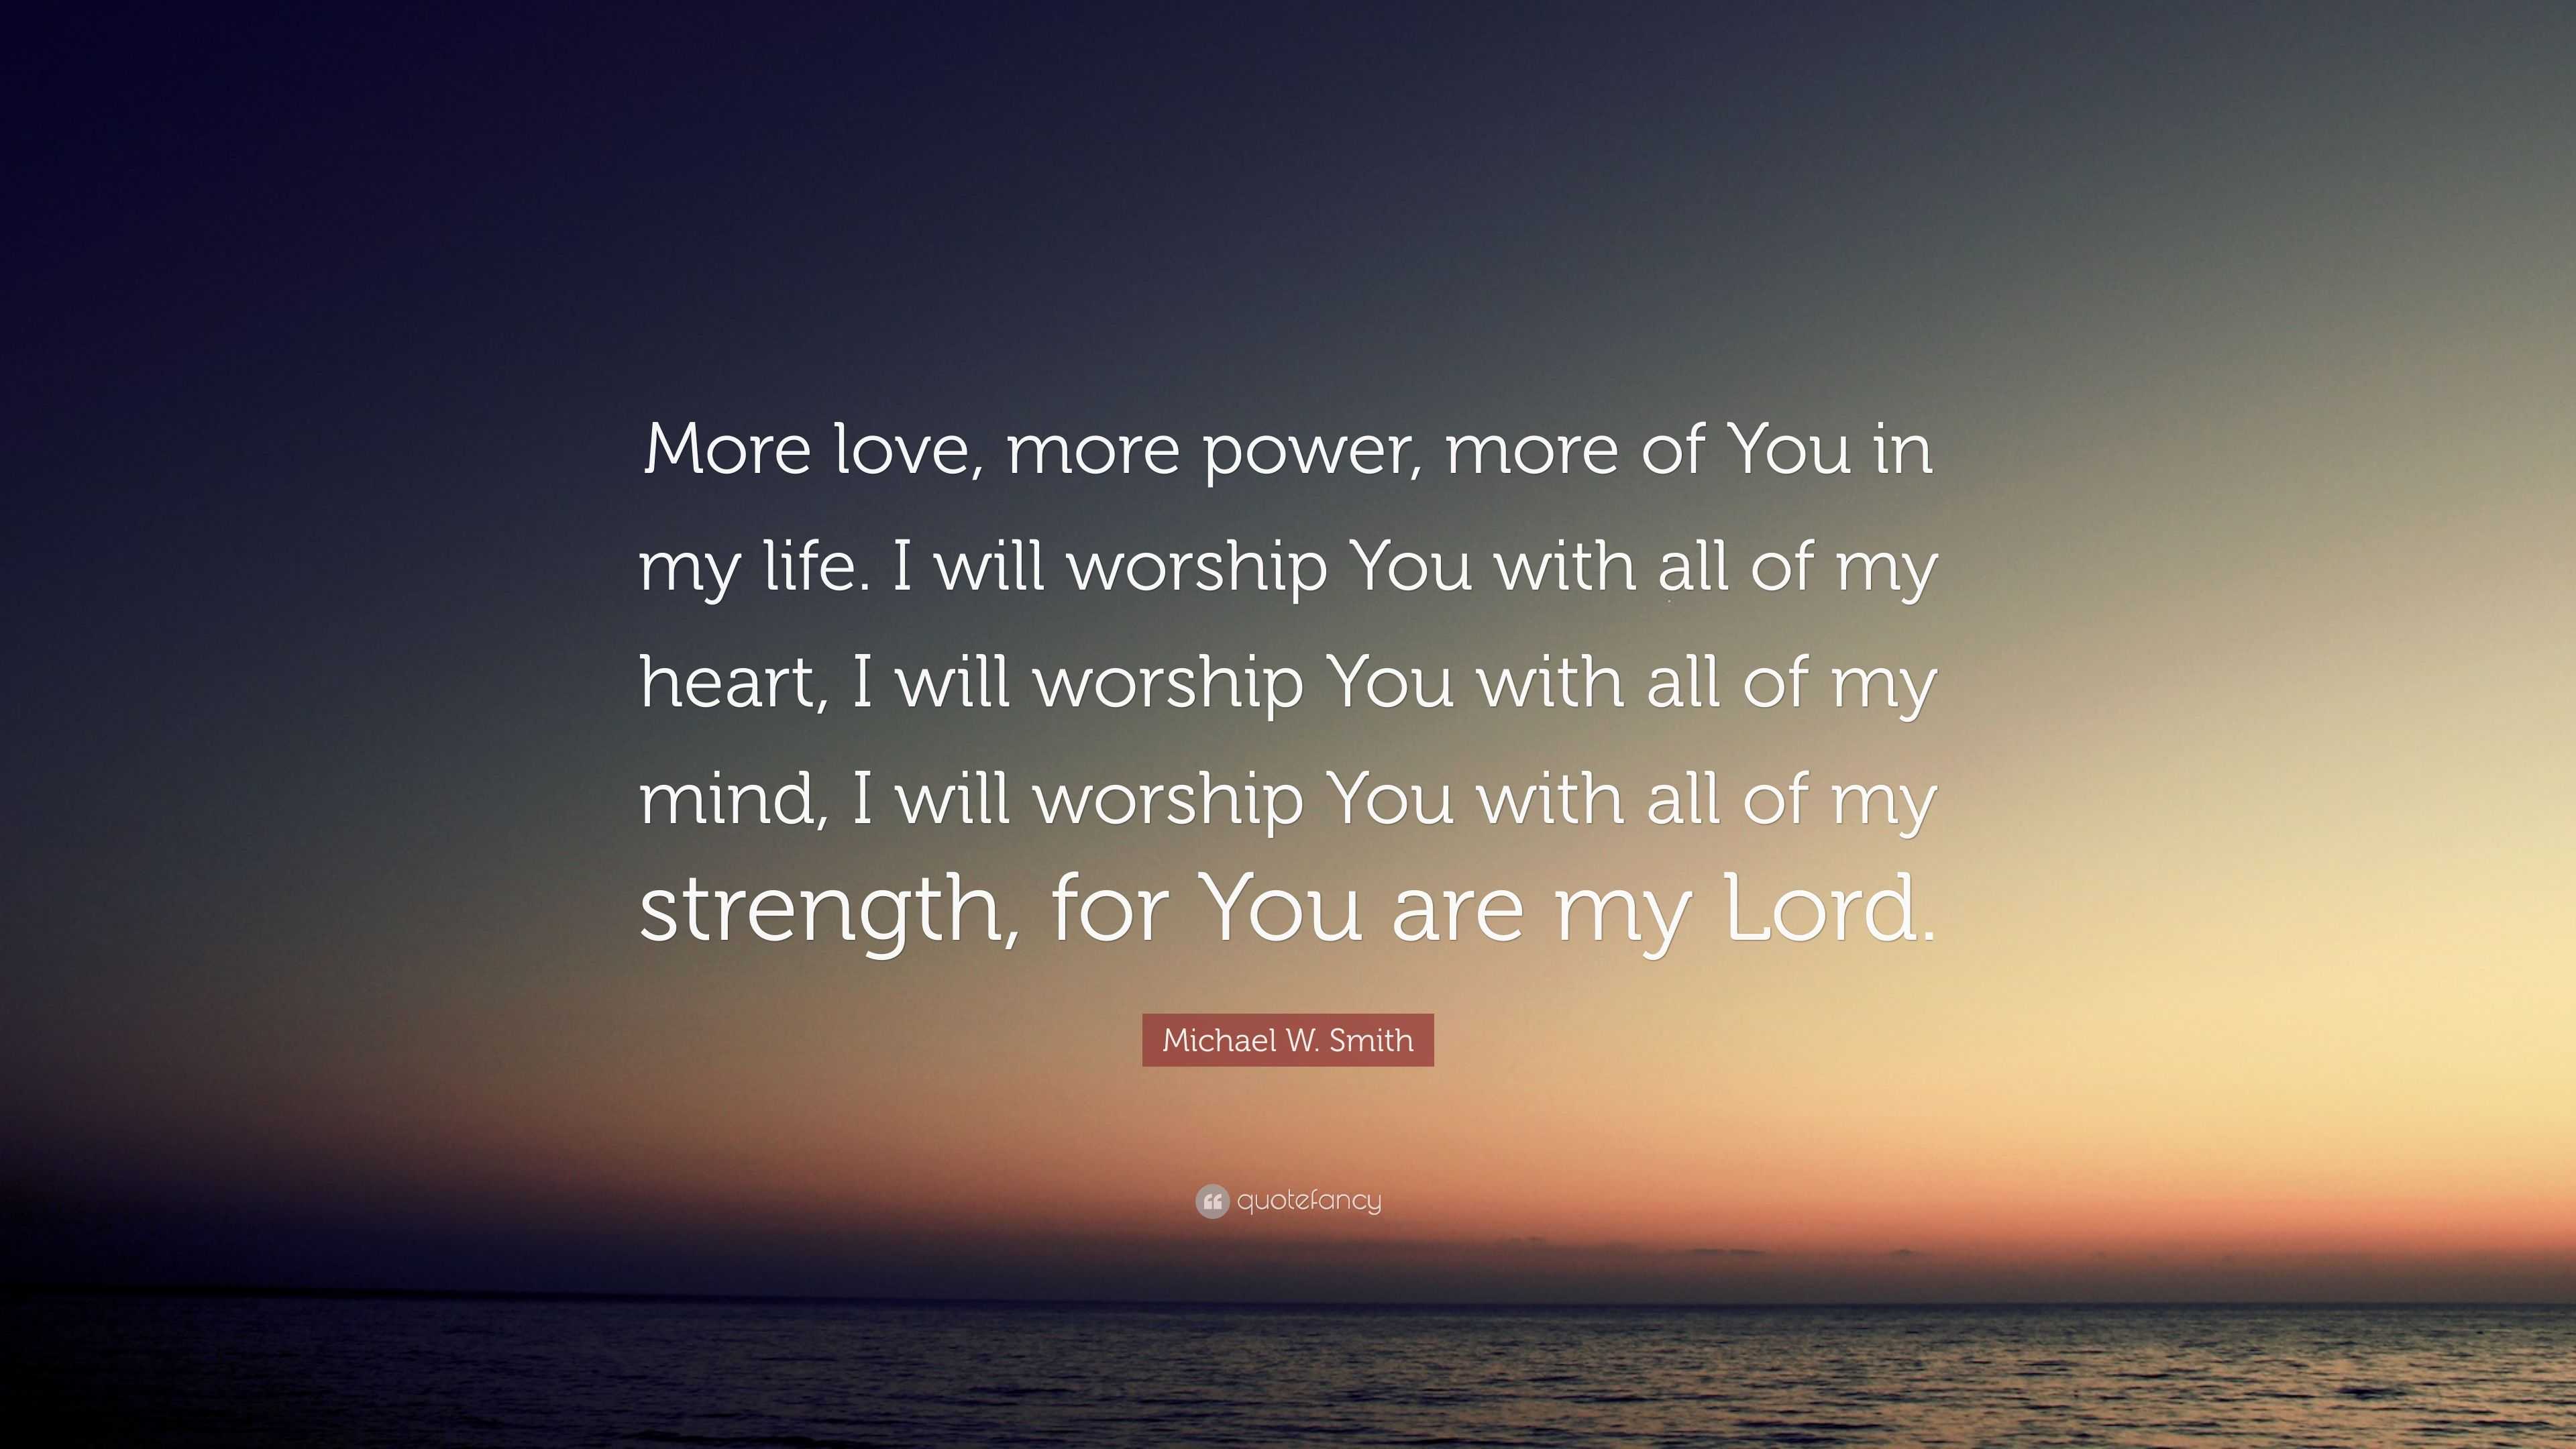 Michael W Smith Quote “More love more power more of You